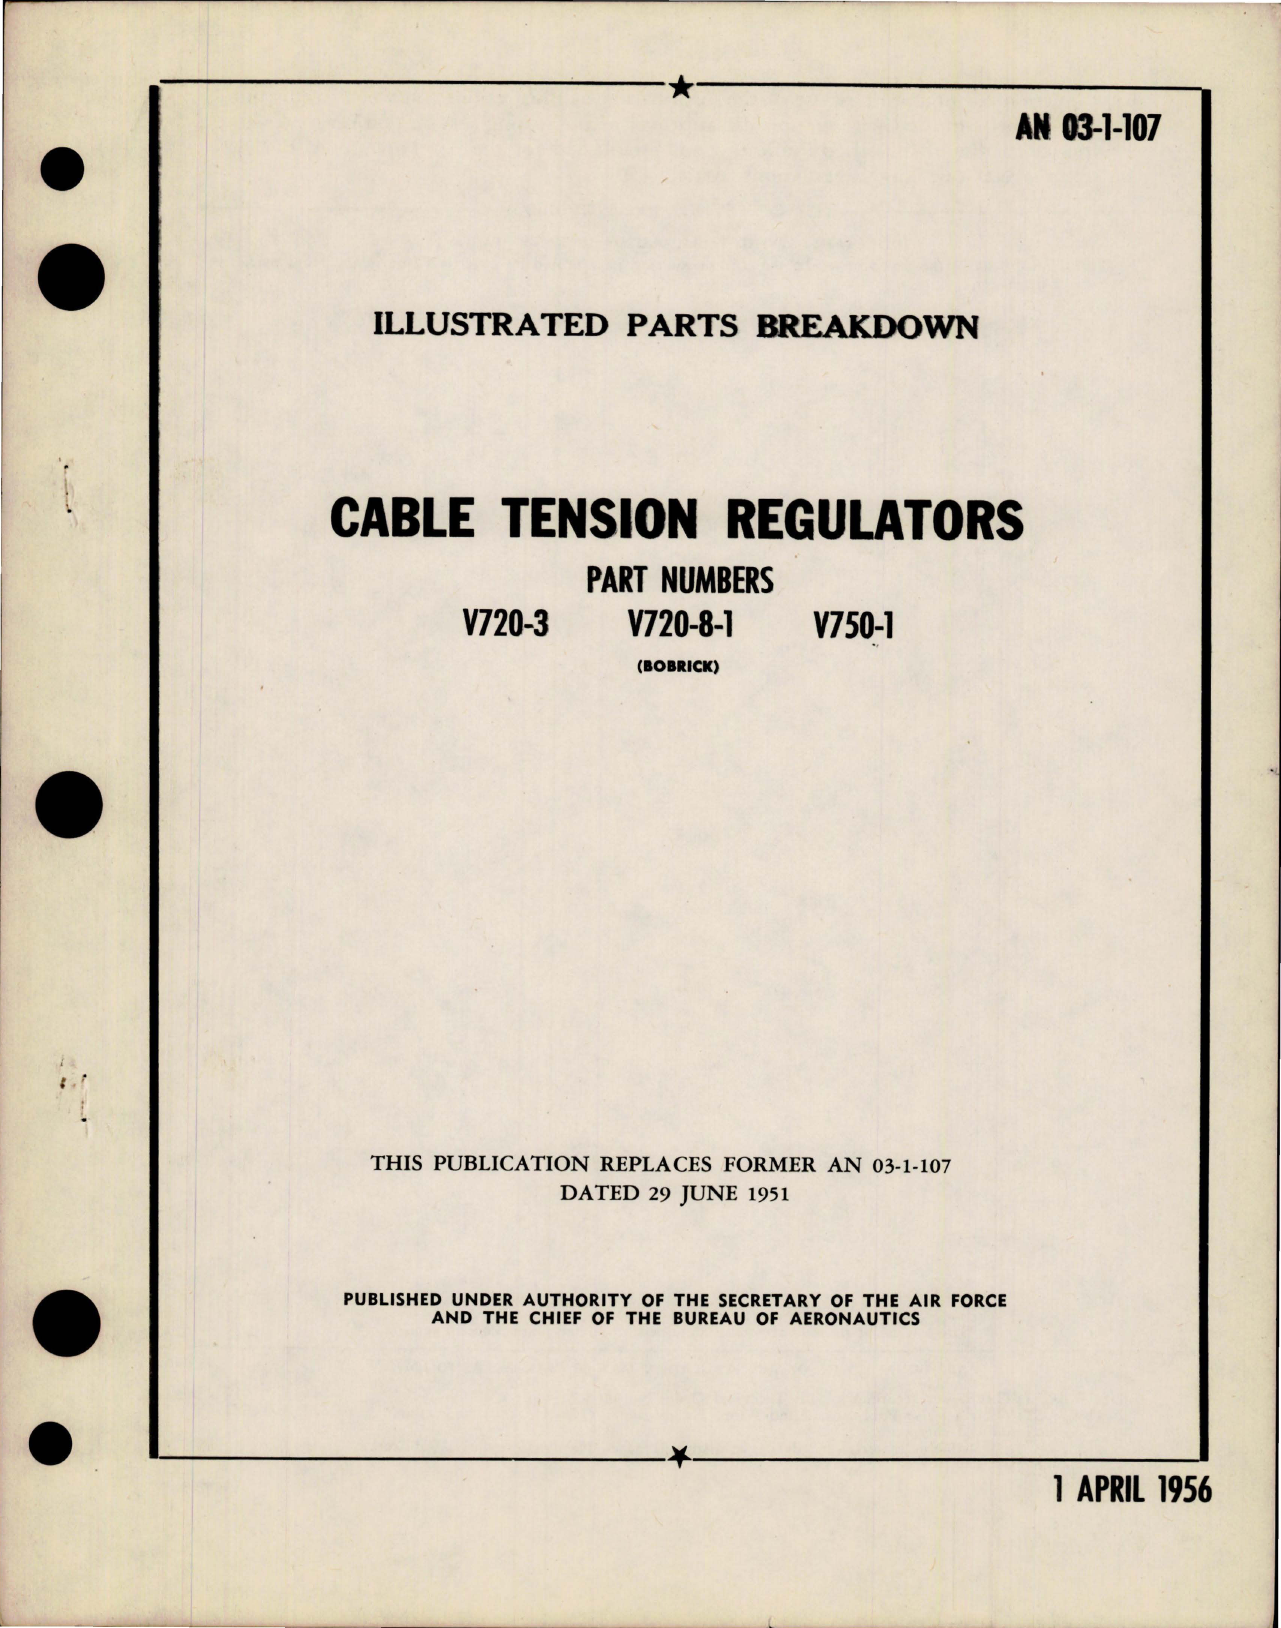 Sample page 1 from AirCorps Library document: Illustrated Parts Breakdown for Cable Tension Regulators - Parts V720-3, V720-8-1 and V750-1